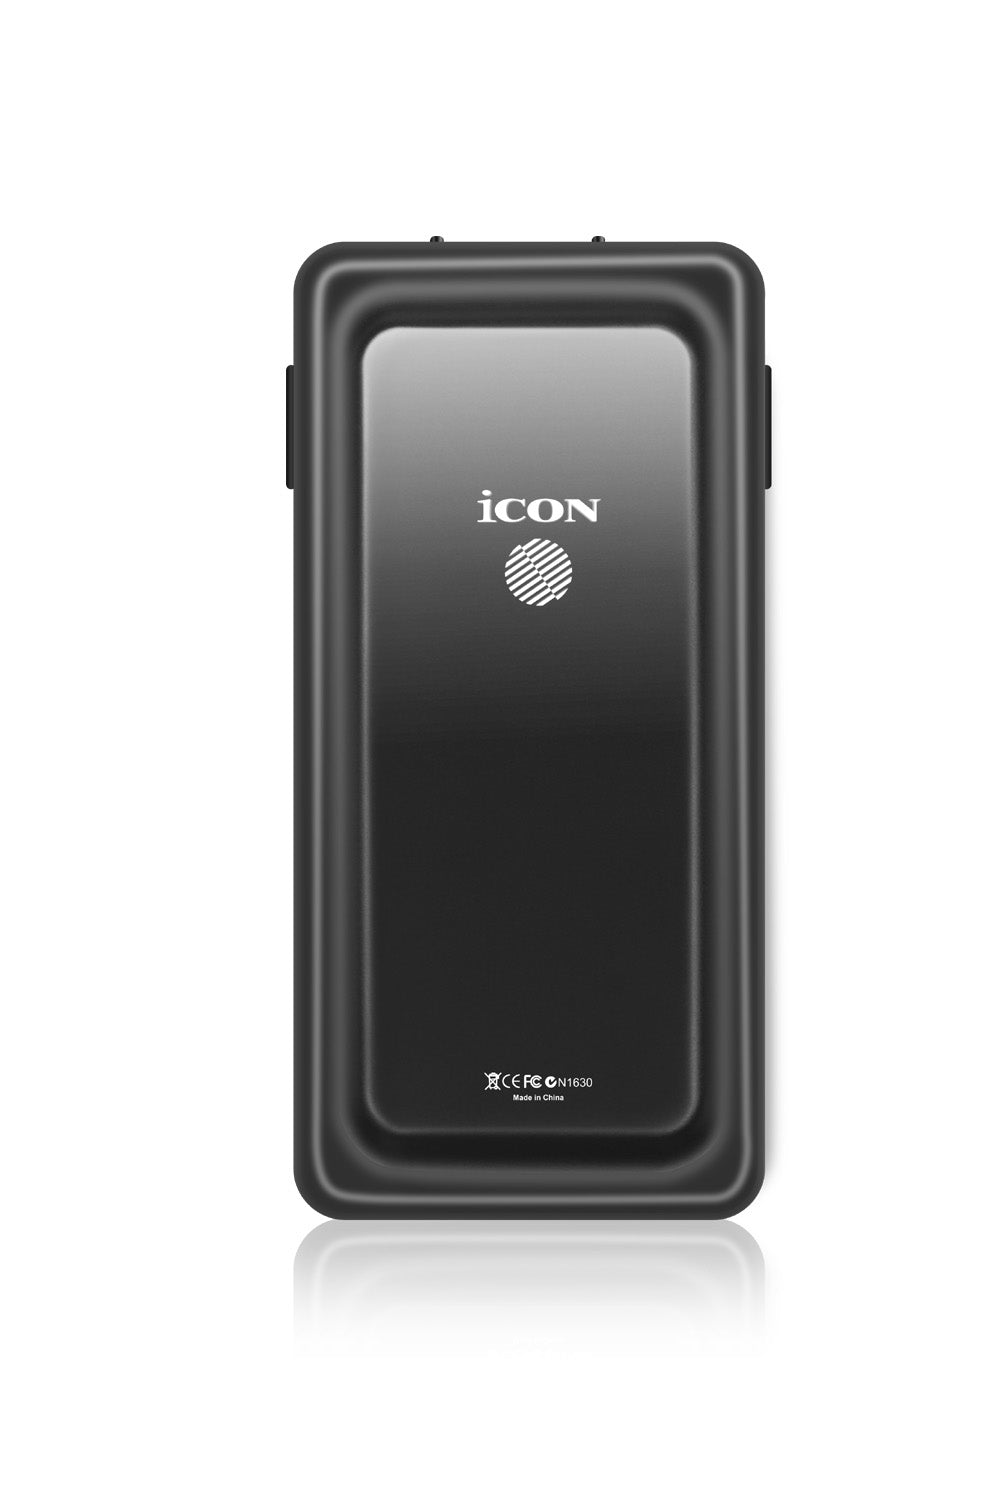 Icon Pro Audio LivePod Plus Bundle With Microphone Stand and Smartphone Mount - Hollywood DJ